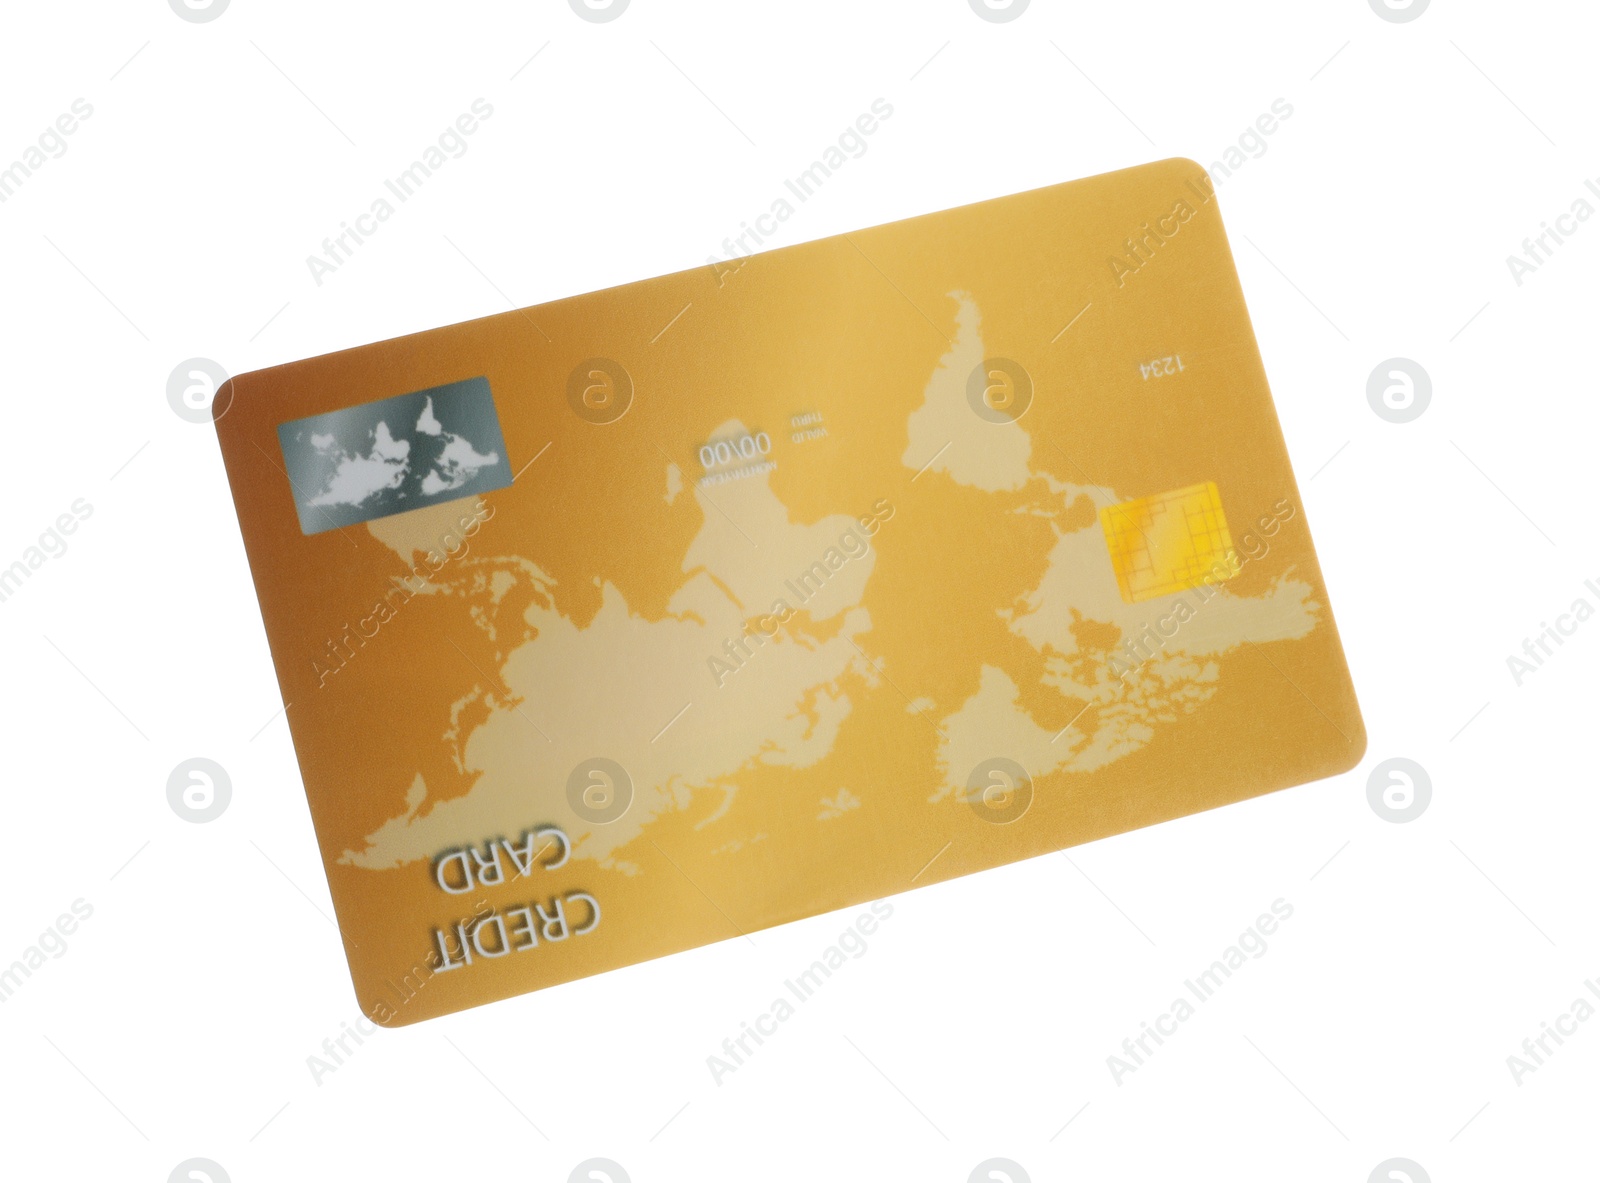 Photo of Golden plastic credit card isolated on white